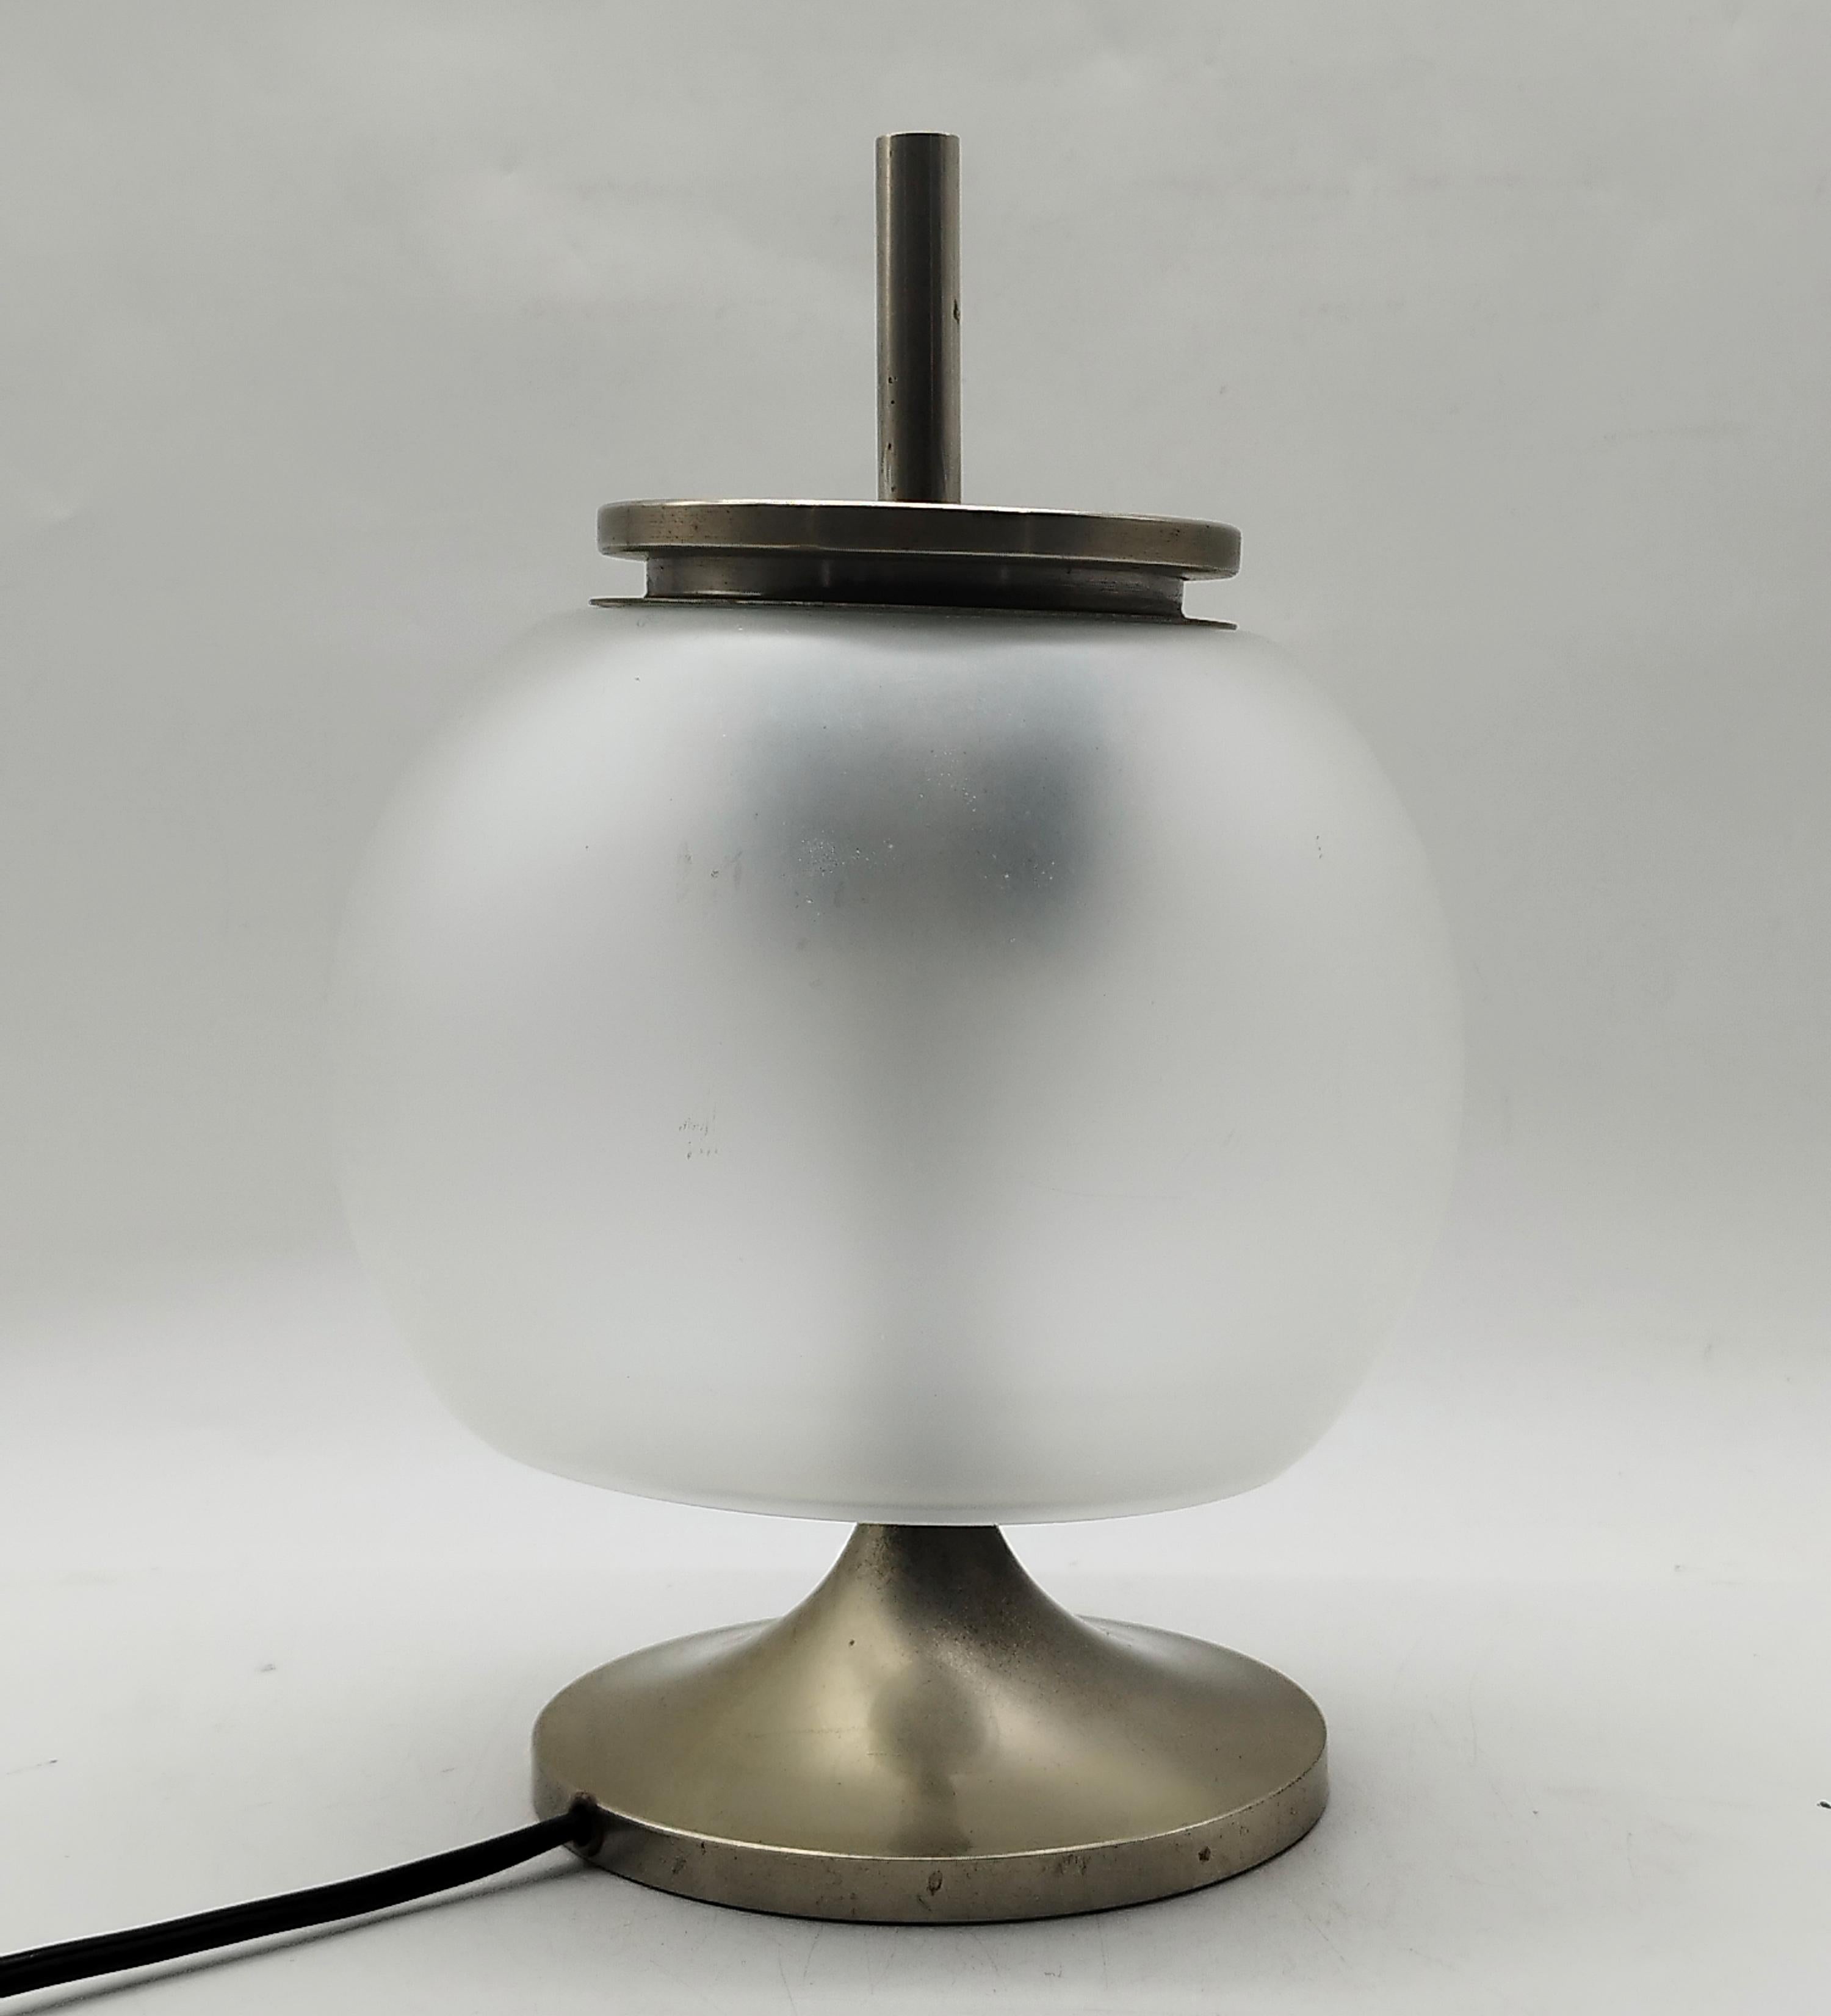 Italian-made table lamp made by Artemide in the 1960s to a design by Emma Gismondi. Nickel-plated brass frame with sand-blasted glass diffuser. 